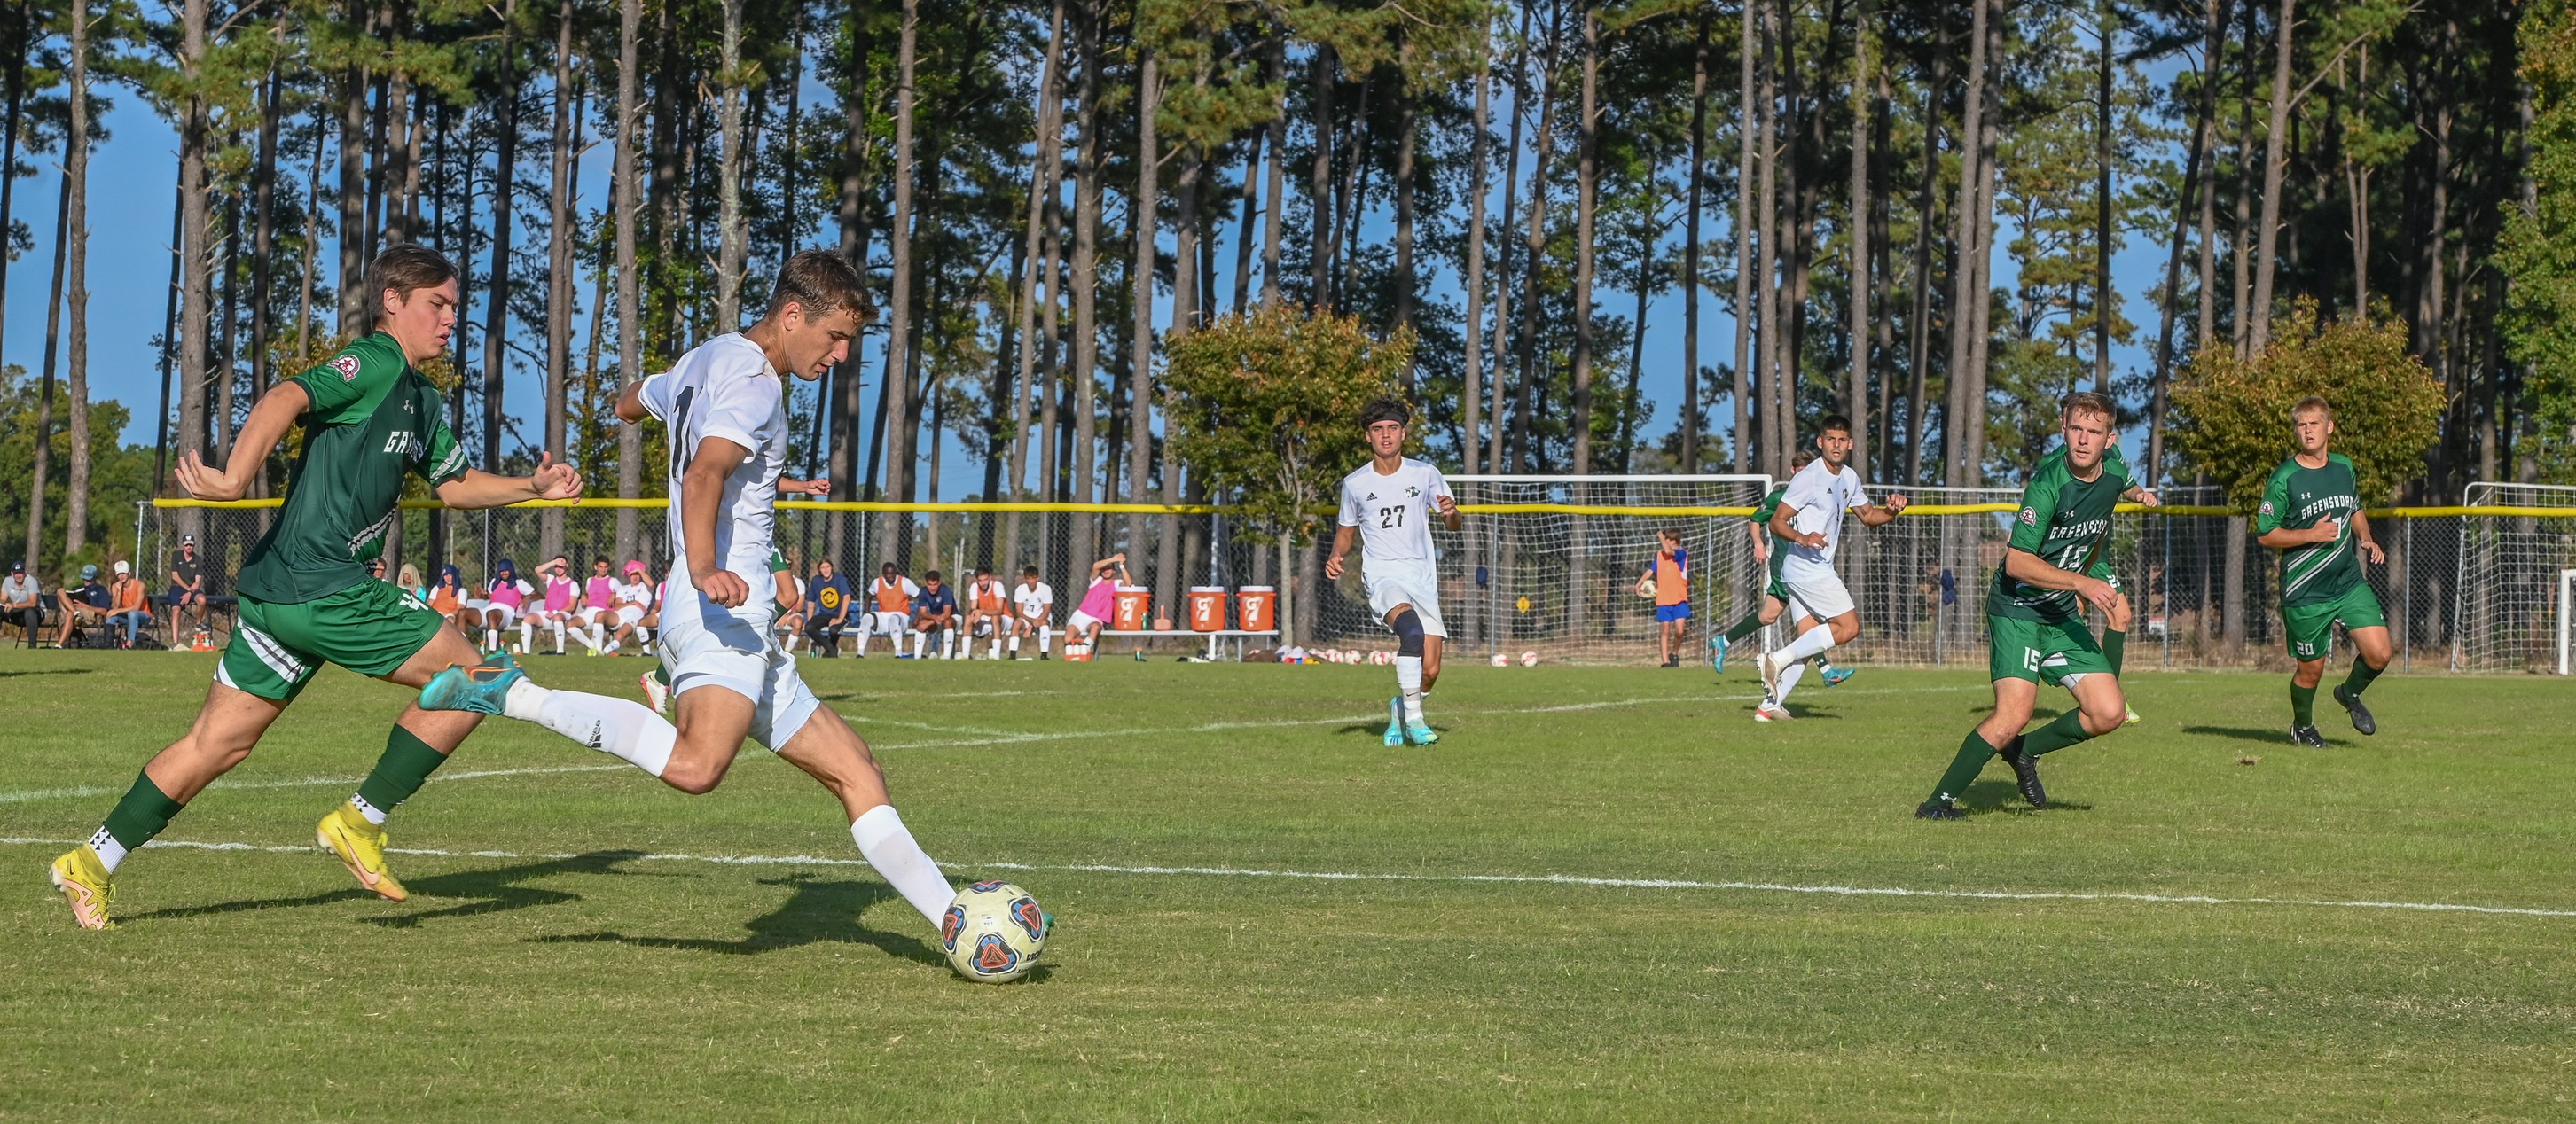 Bishops Soccer Shuts Out Greensboro On Senior Day